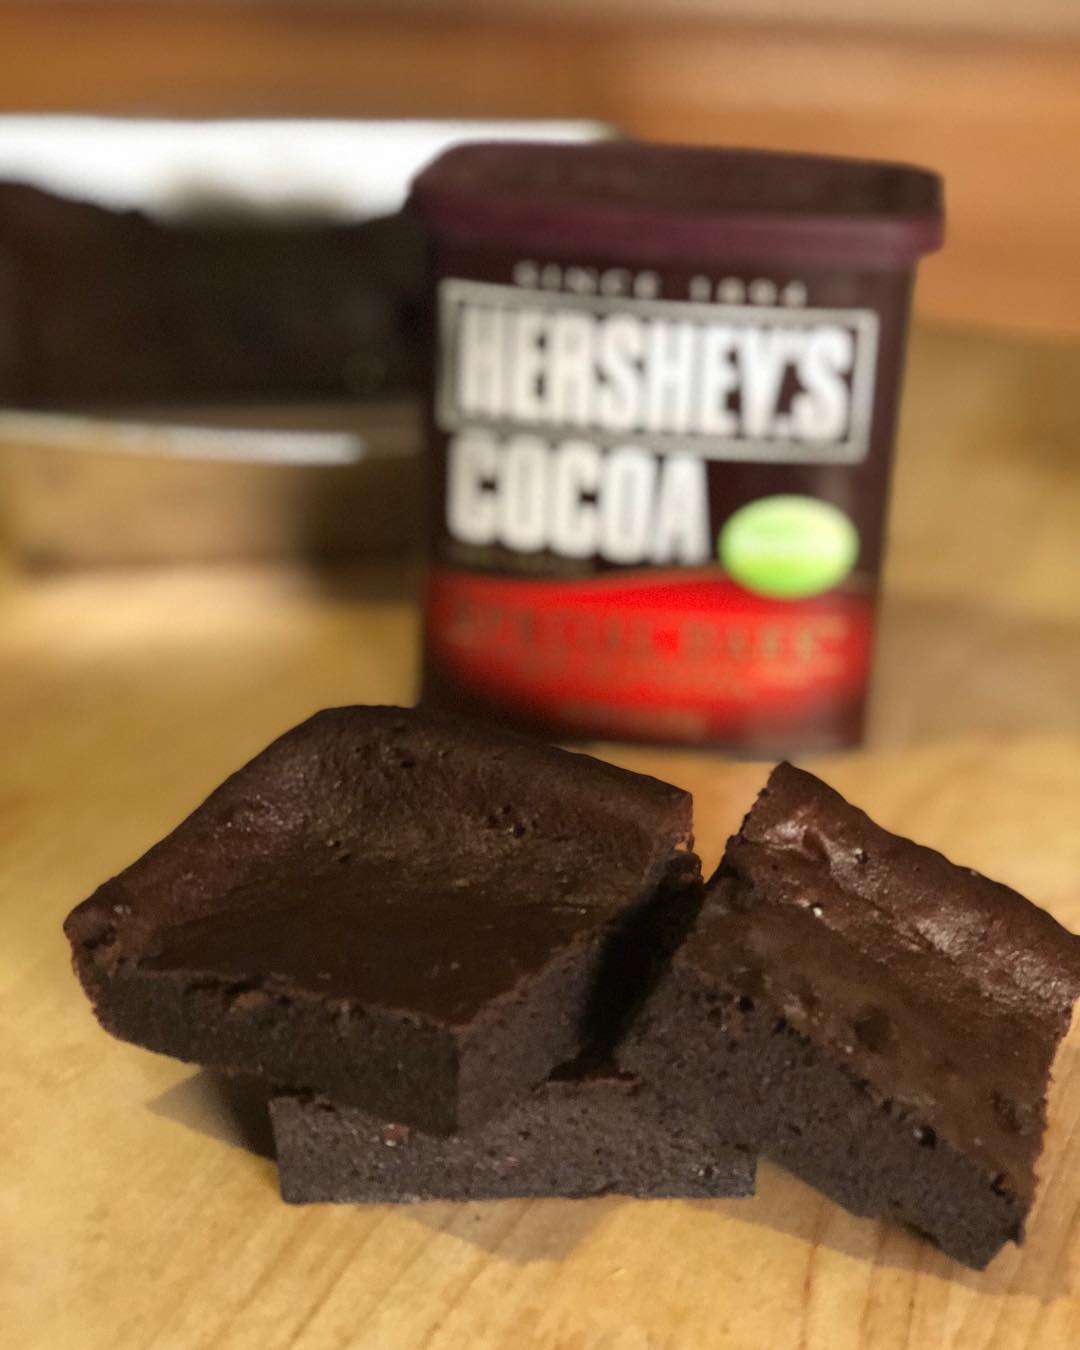 Was craving brownies so dug up the recipe by @ruledme reposted by @ketohackershop! In my opinion, this recipe is good, not great.. dealing with the cocoa powder was SUPER messy but these brownies definitely help you get your chocolate fix!!
—-
Brownies on keto? Yep that’s right.
.
Here is a delicious and simple keto brownie recipe by @ruledme
.
This makes a total of 16 Flourless Keto Brownies. Each serving comes out to be 87 Calories, 8g Fat, 3g Net Carbs, and 2g Protein!
.
INGREDIENTS:
5 ounces low-carb milk chocolate
4 tablespoons butter
3 large eggs
½ cup erythritol 
¼ cup mascarpone cheese
¼ cup unsweetened cocoa powder
½ teaspoon salt
.
DIRECTIONS

1) Heat oven to 375°F and line a baking sheet with parchment. Melt 5 ounces chocolate in a glass bowl on medium heat for 30 intervals, stirring each time until smooth.

2) Add butter and microwave the bowl for ten seconds. Stir. Repeat until smooth. Set aside to allow to slightly cool while you prepare the batter.

3) In a large bowl, beat three eggs and ½ cup granulated sweetener on high until the mixture becomes frothy and the eggs become pale. This should take about 3-5 minutes.

4) Add the mascarpone cheese and beat until smooth.

5) Sift in half of the cocoa powder and ½ tsp salt and gently mix. The power will resist mixing with the egg so go slow and keep at it.

6) Sift in the rest of the coco powder and stir until all of the mixture is dissolved and the batter forms.

7) Make sure you chocolate is still melted. If not, heat for 10 seconds and stir. Fold the melted chocolate into the batter and mix well until it is creamy and there are no lumps.

8) Pour batter in prepared 8×8 pan and bake at 375°F for 25 minutes or until the center no longer jiggles.

9) Remove from pan and cool completely before cutting